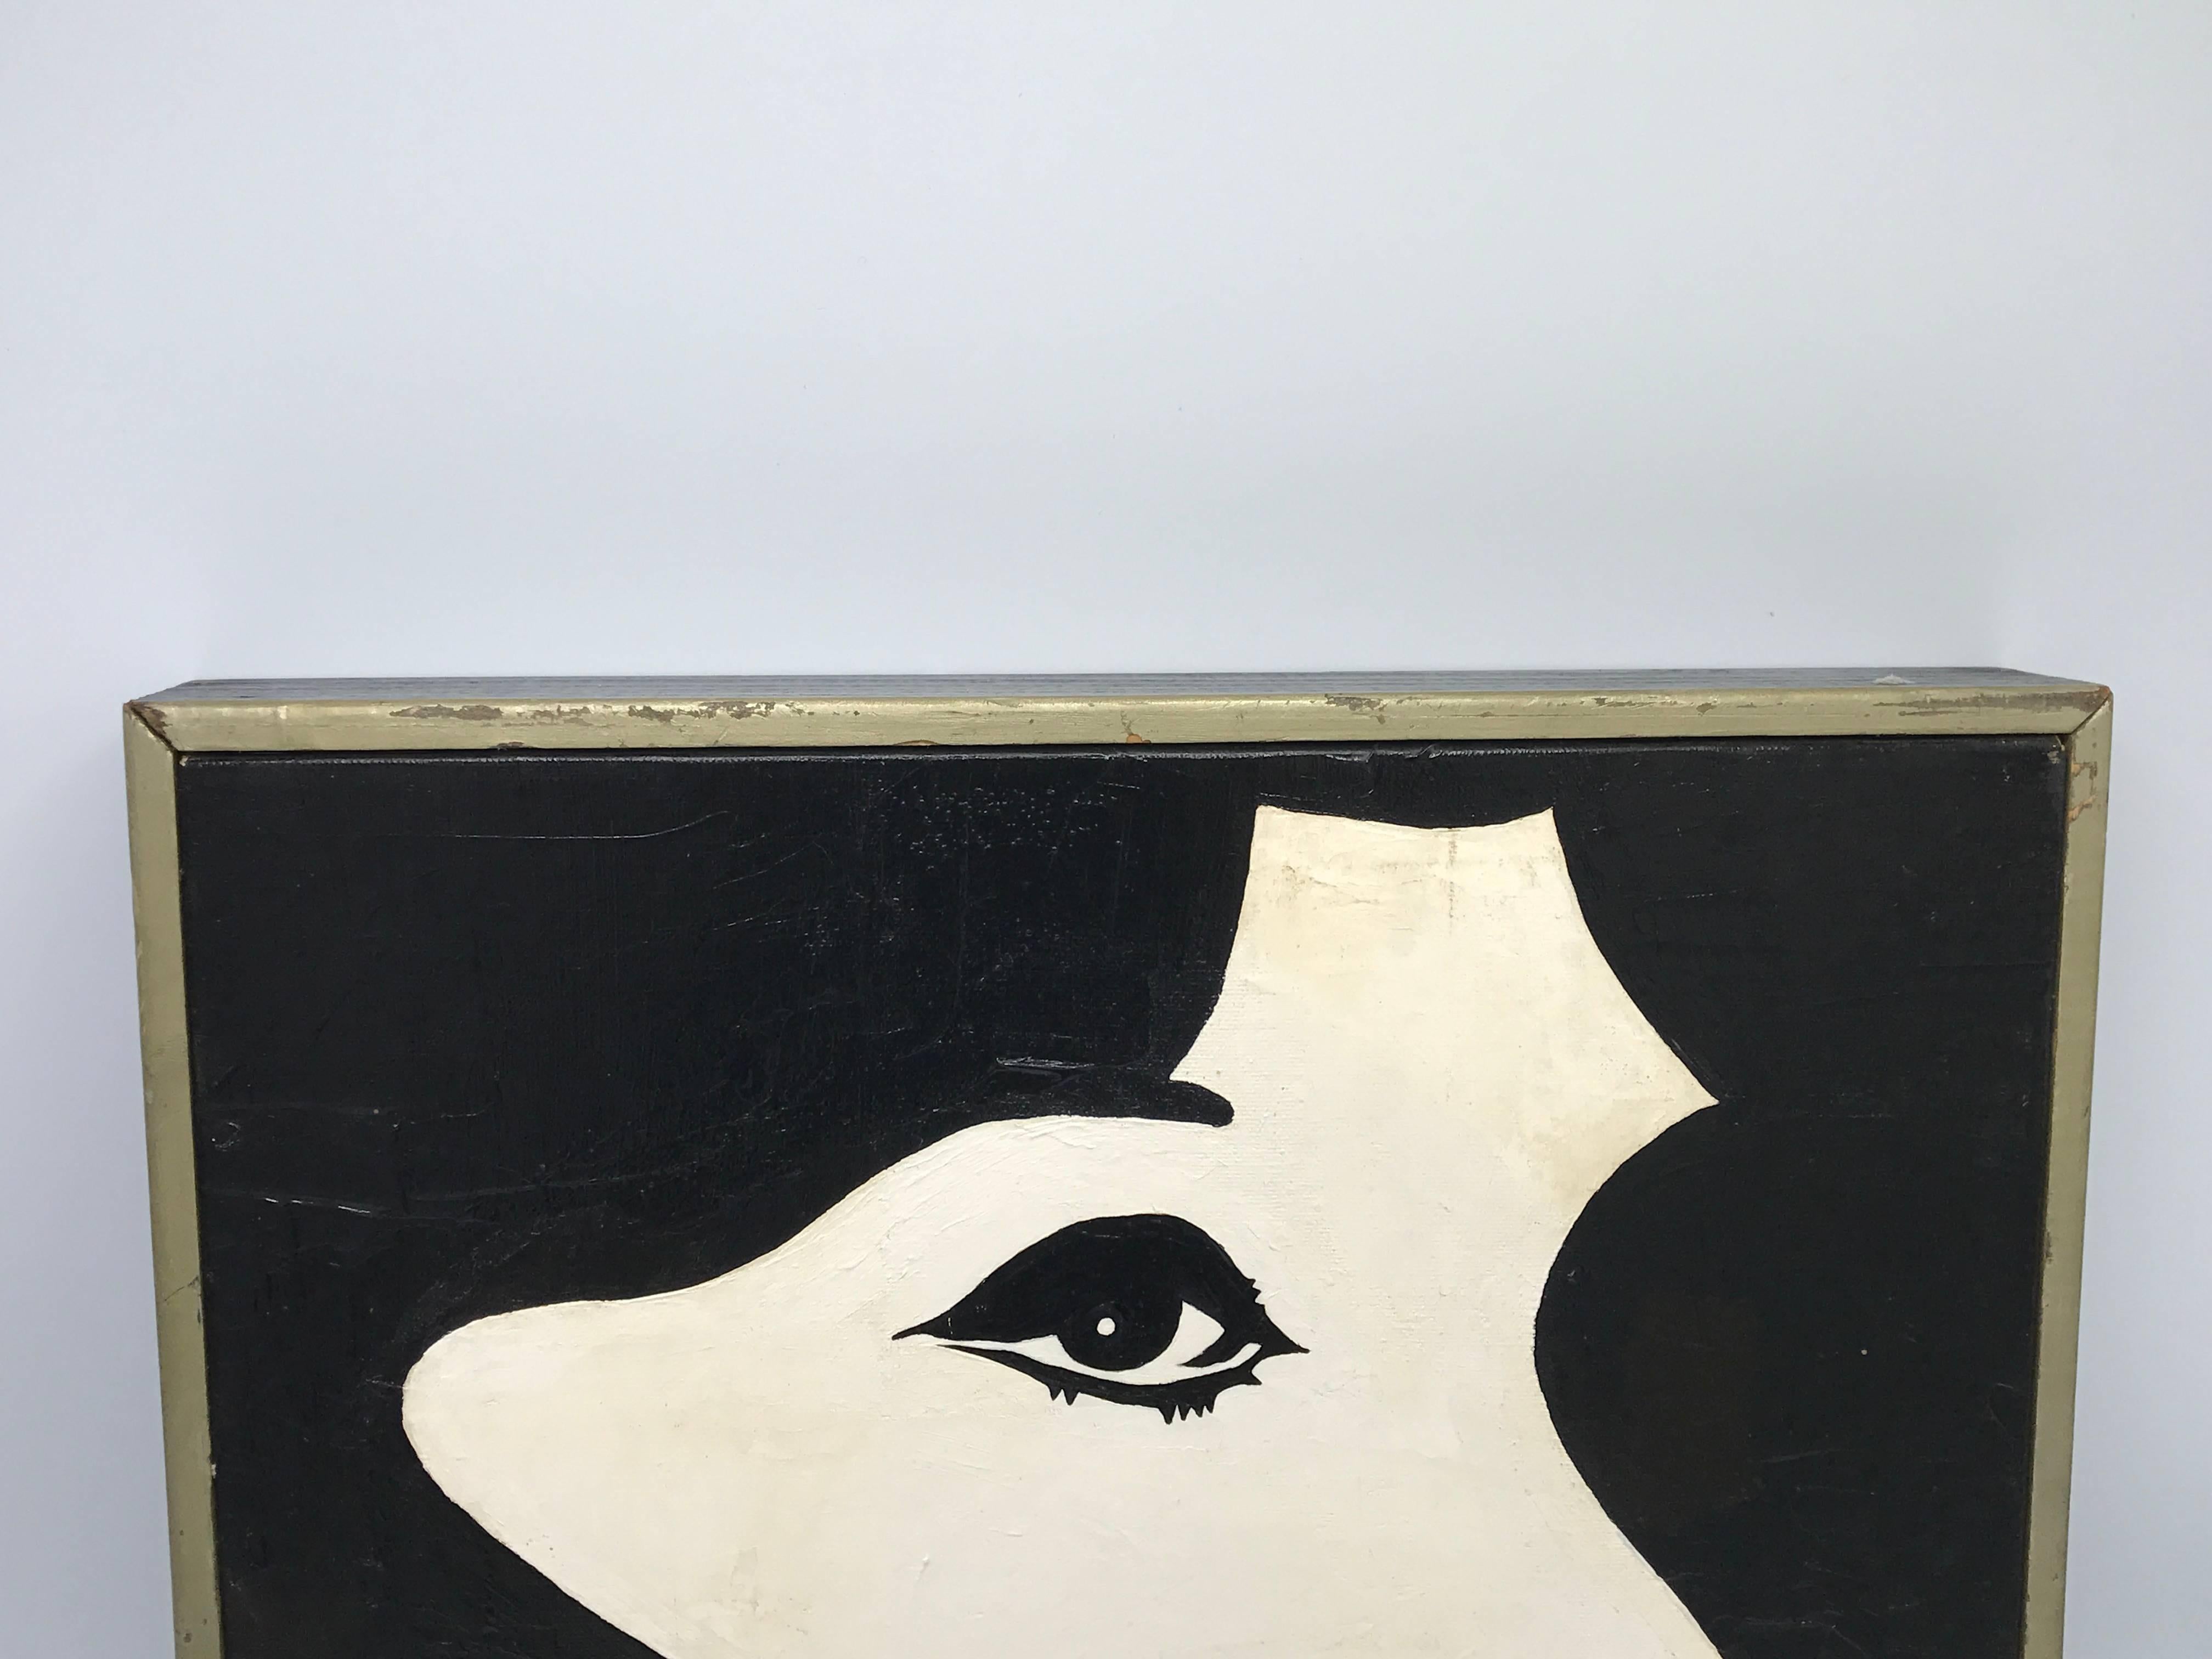 Offered is a beautiful, 1960s abstract-modern black and white oil-on-canvas painting of Jackie O or Edie Sedgwick. Framed.